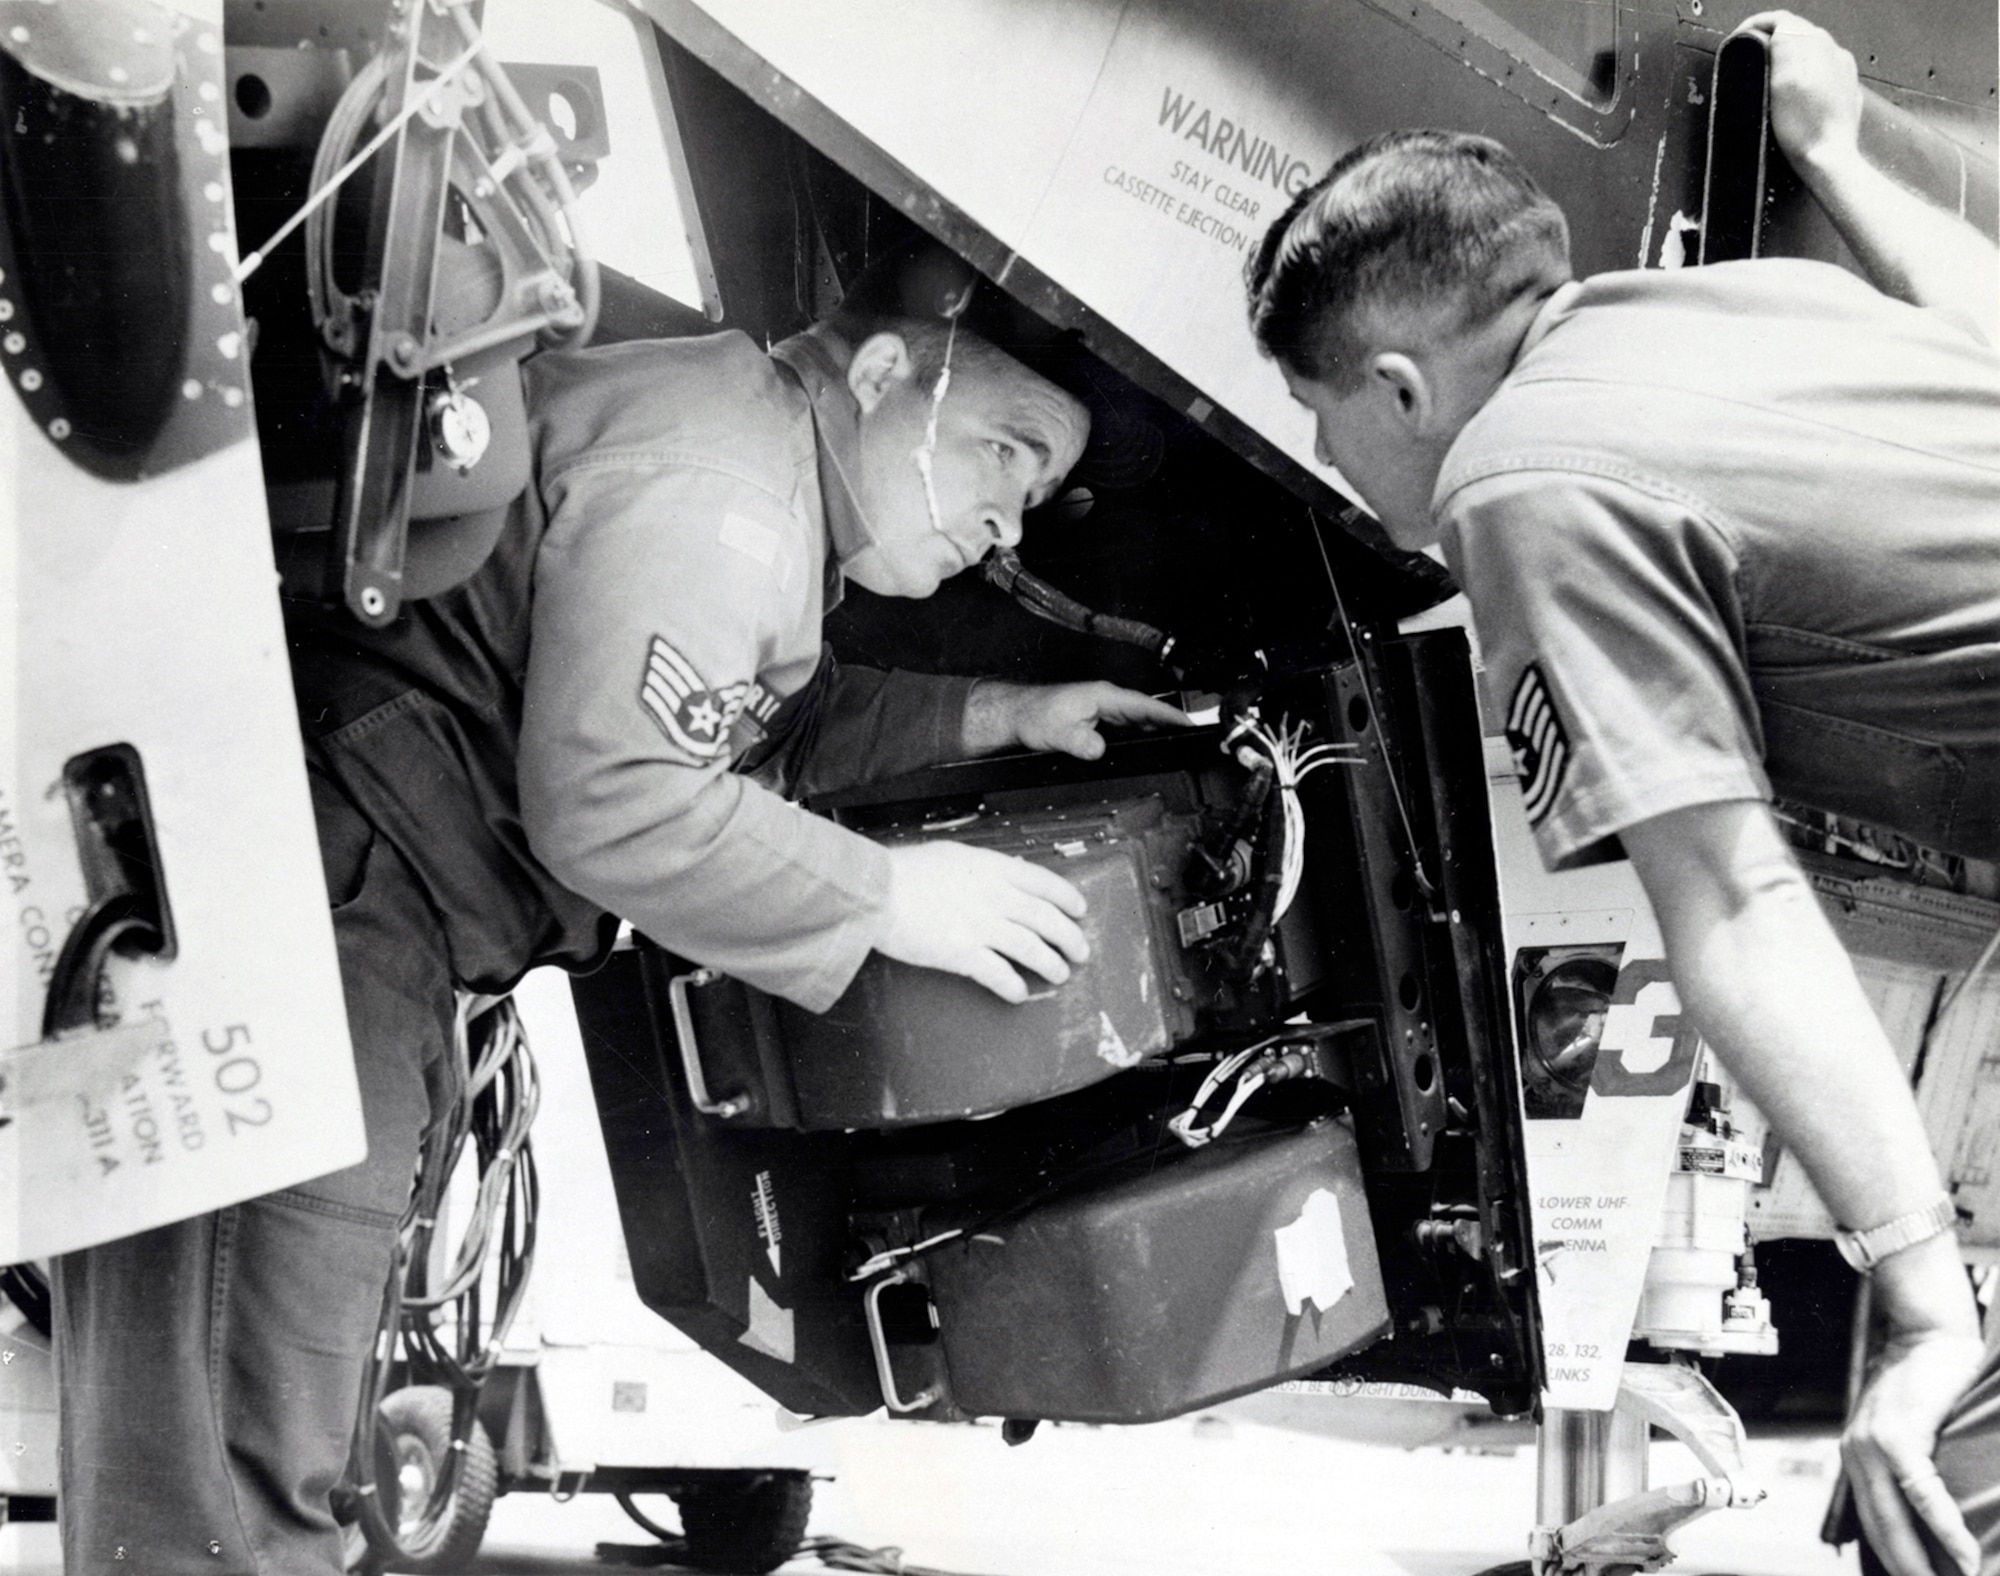 Camera technicians Staff Sgt. Gerald Richey (left) and Tech. Sgt. Harold Cockrum quickly retrieve film from an RF-4C. Rapid photo processing, analysis and distribution were top priorities. (U.S. Air Force photo)